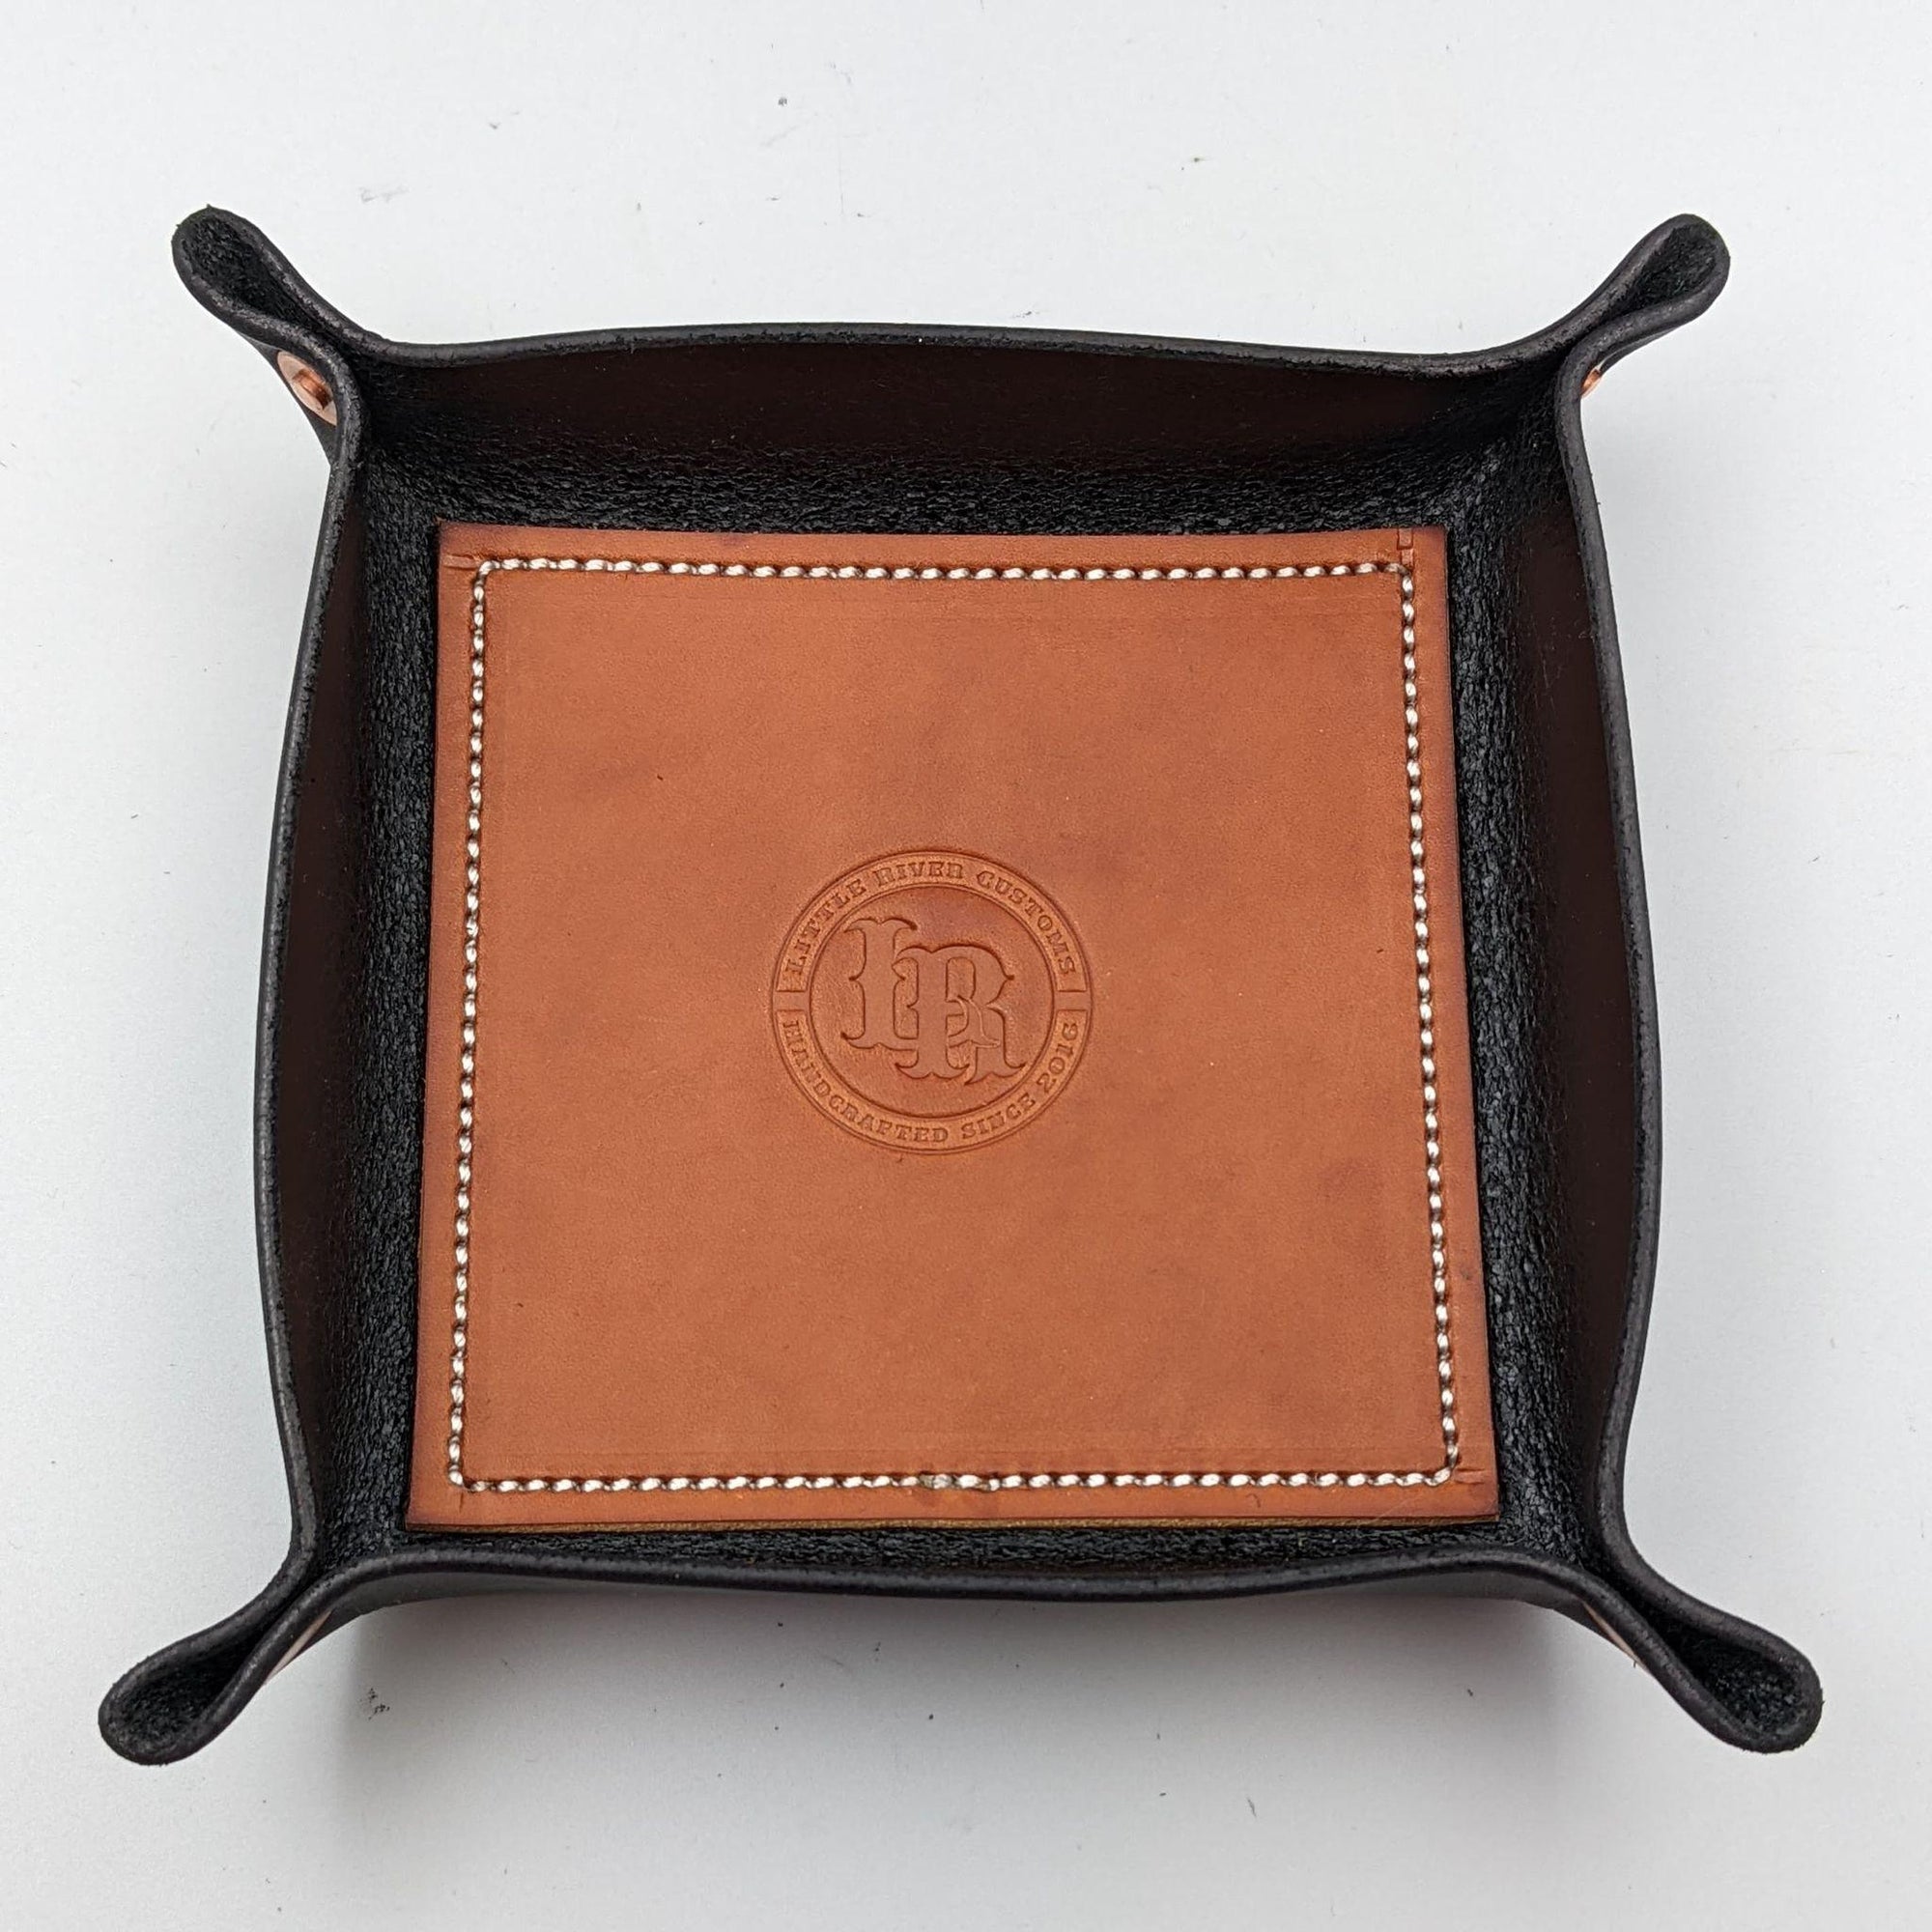 Leather Dump Tray, Leather EDC Tray, Leather Valet Tray, Handmade, EDC tray, dump tray, valet tray